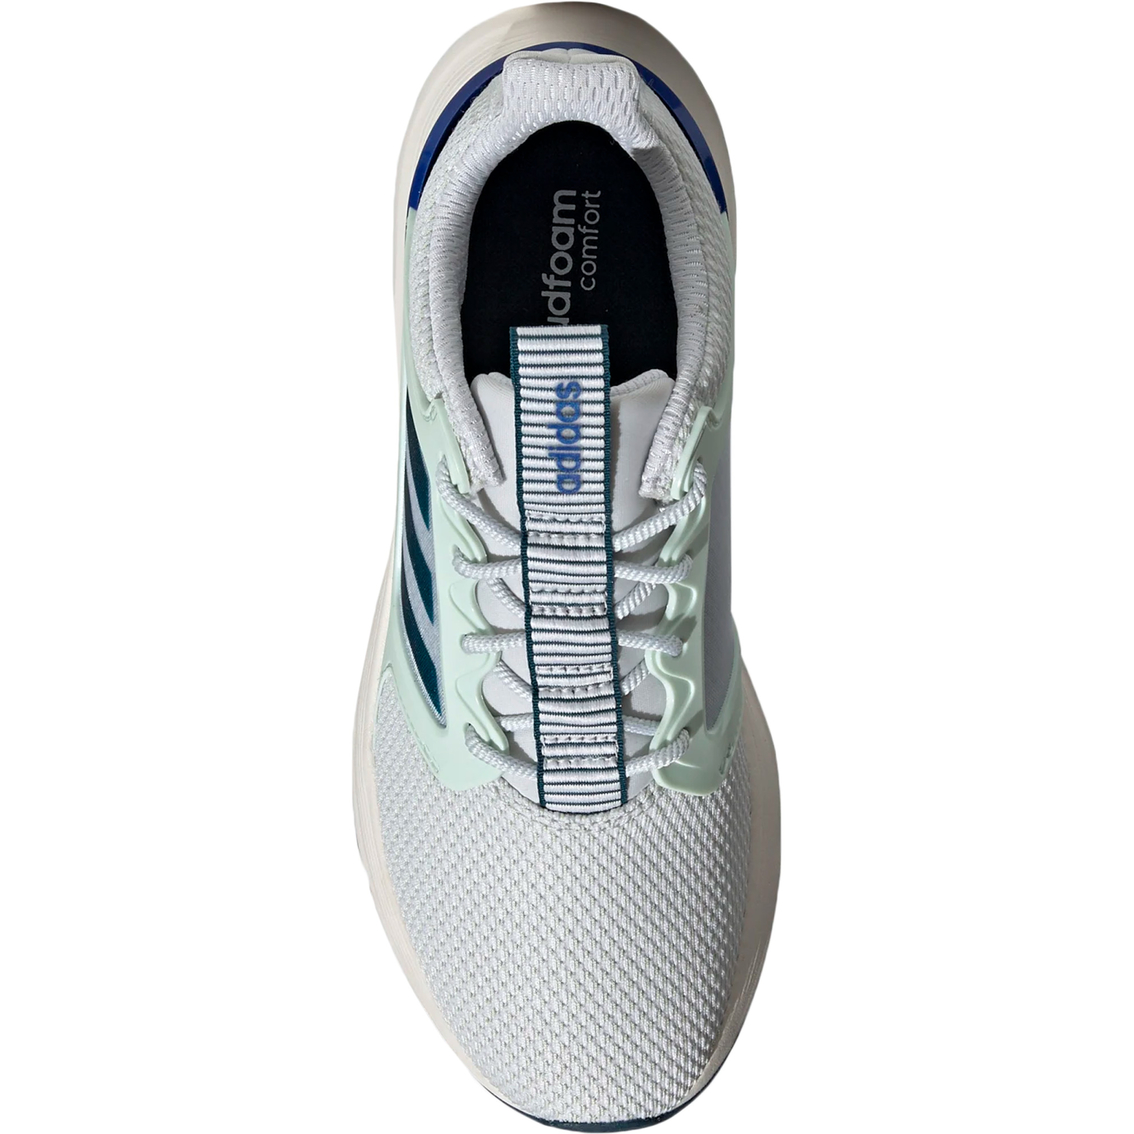 adidas Women's Energyfalcon X Running Shoes - Image 5 of 8